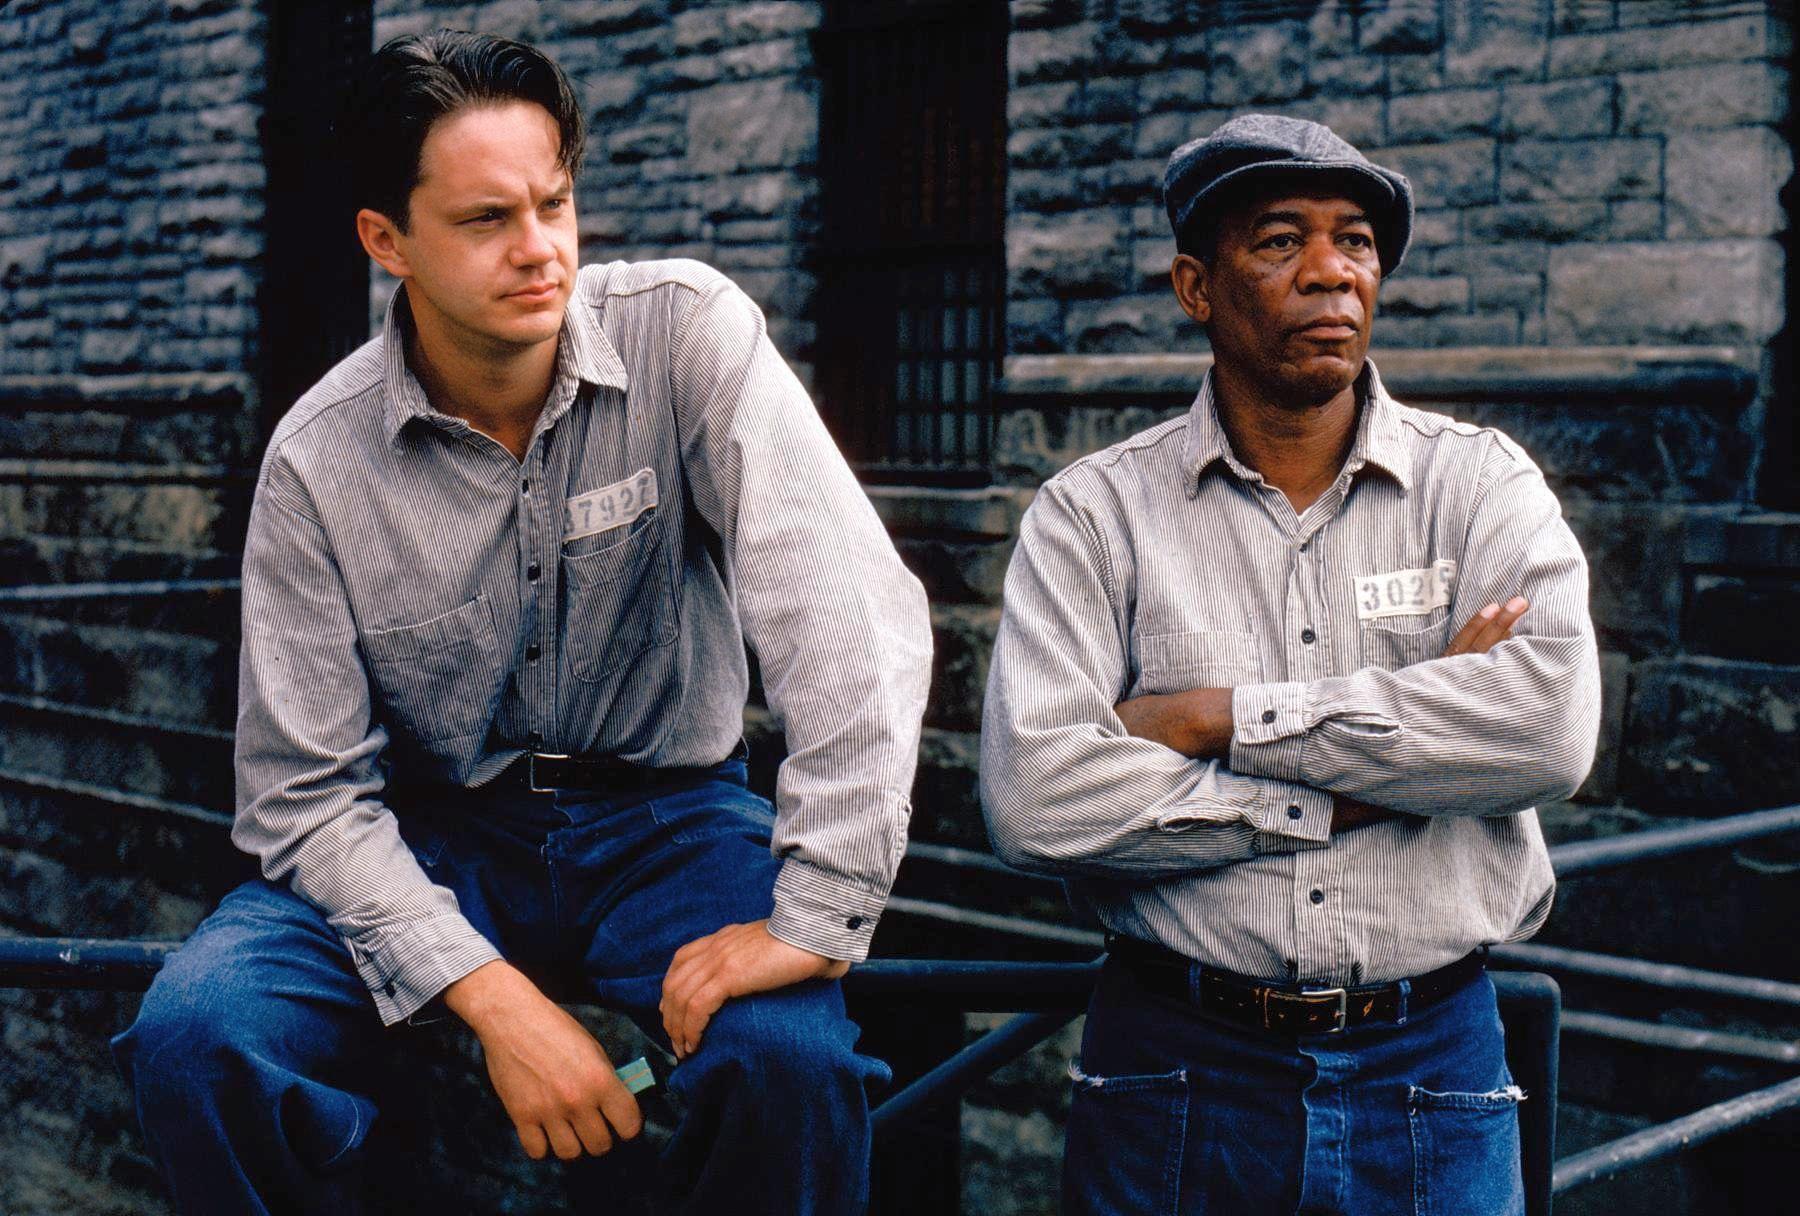 HD The Shawshank Redemption Wallpaper and Photo. HD Movies